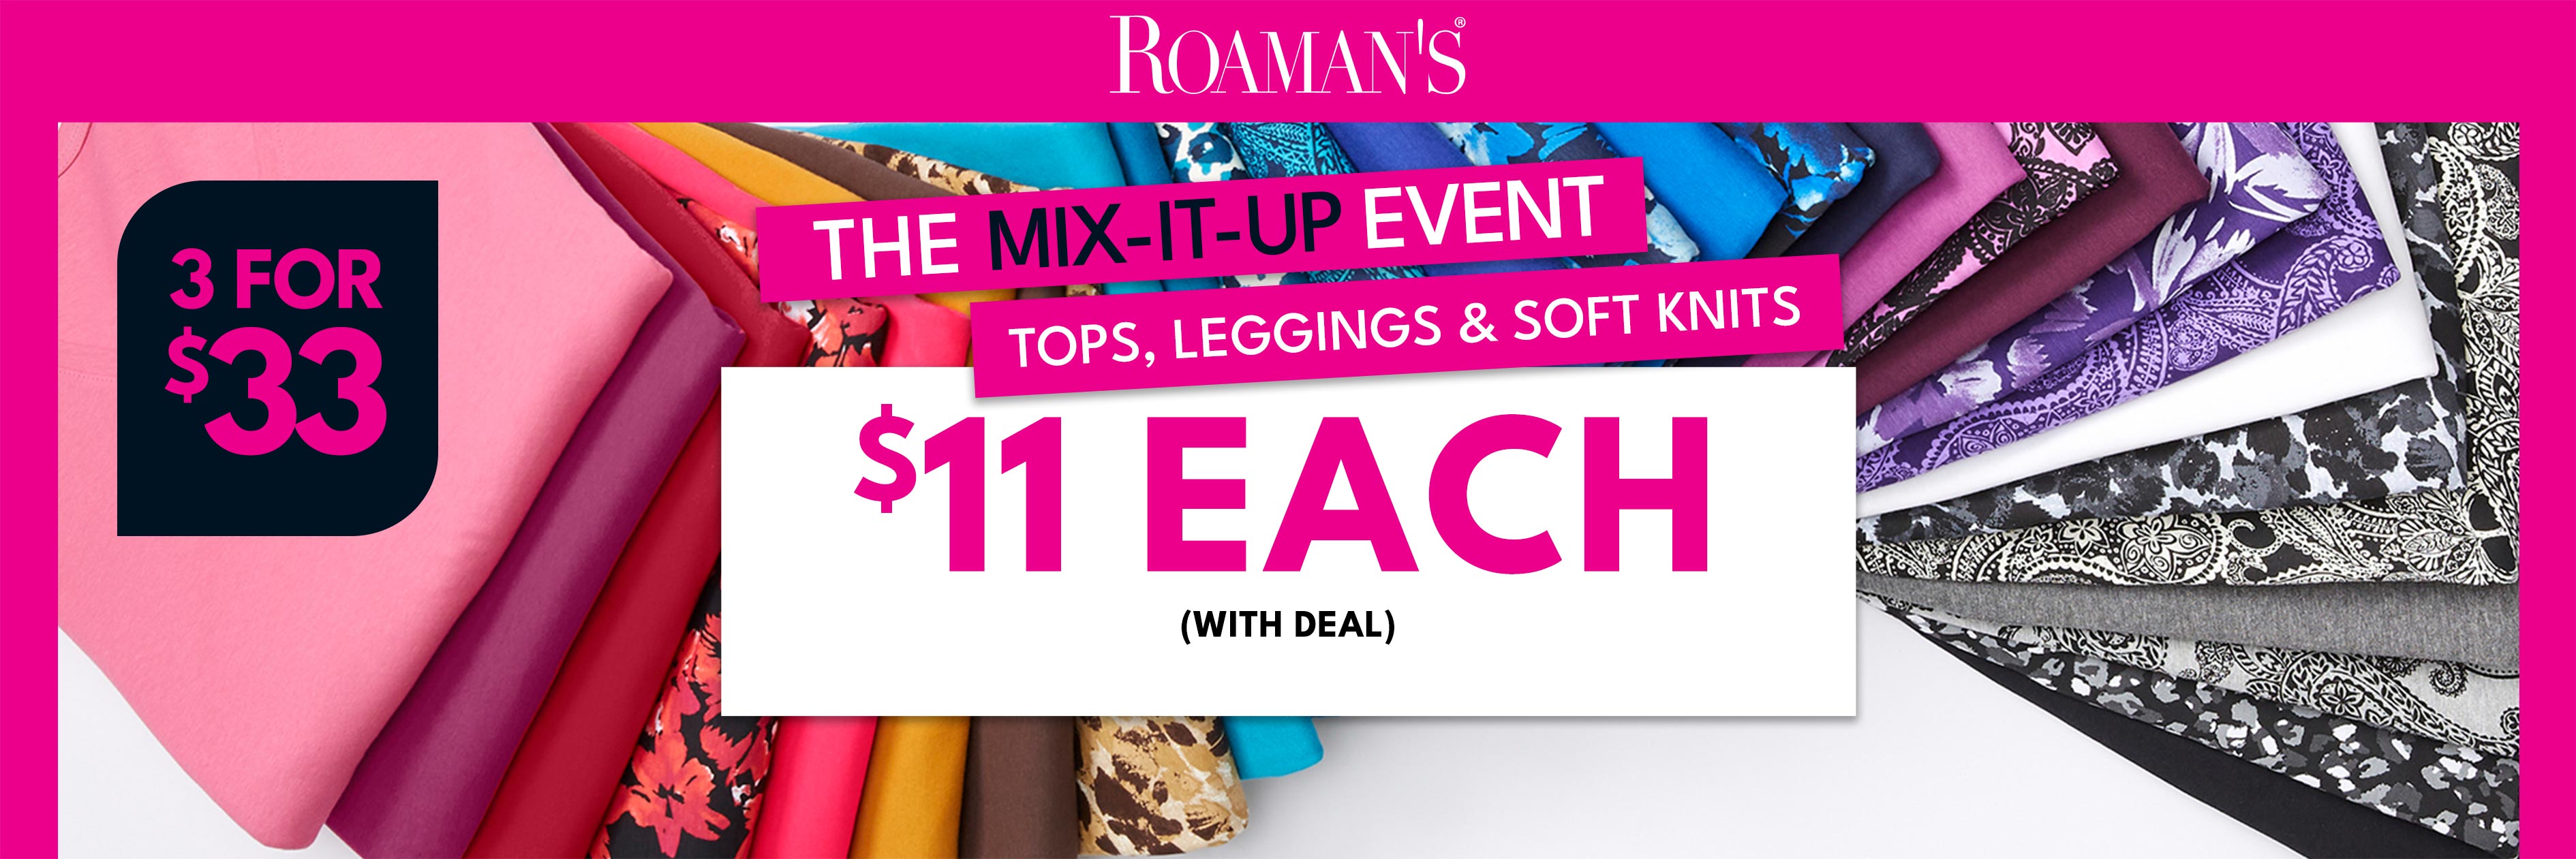 3 for $33 the mix it up event tops, leggings & soft knits $11 each shop the sale